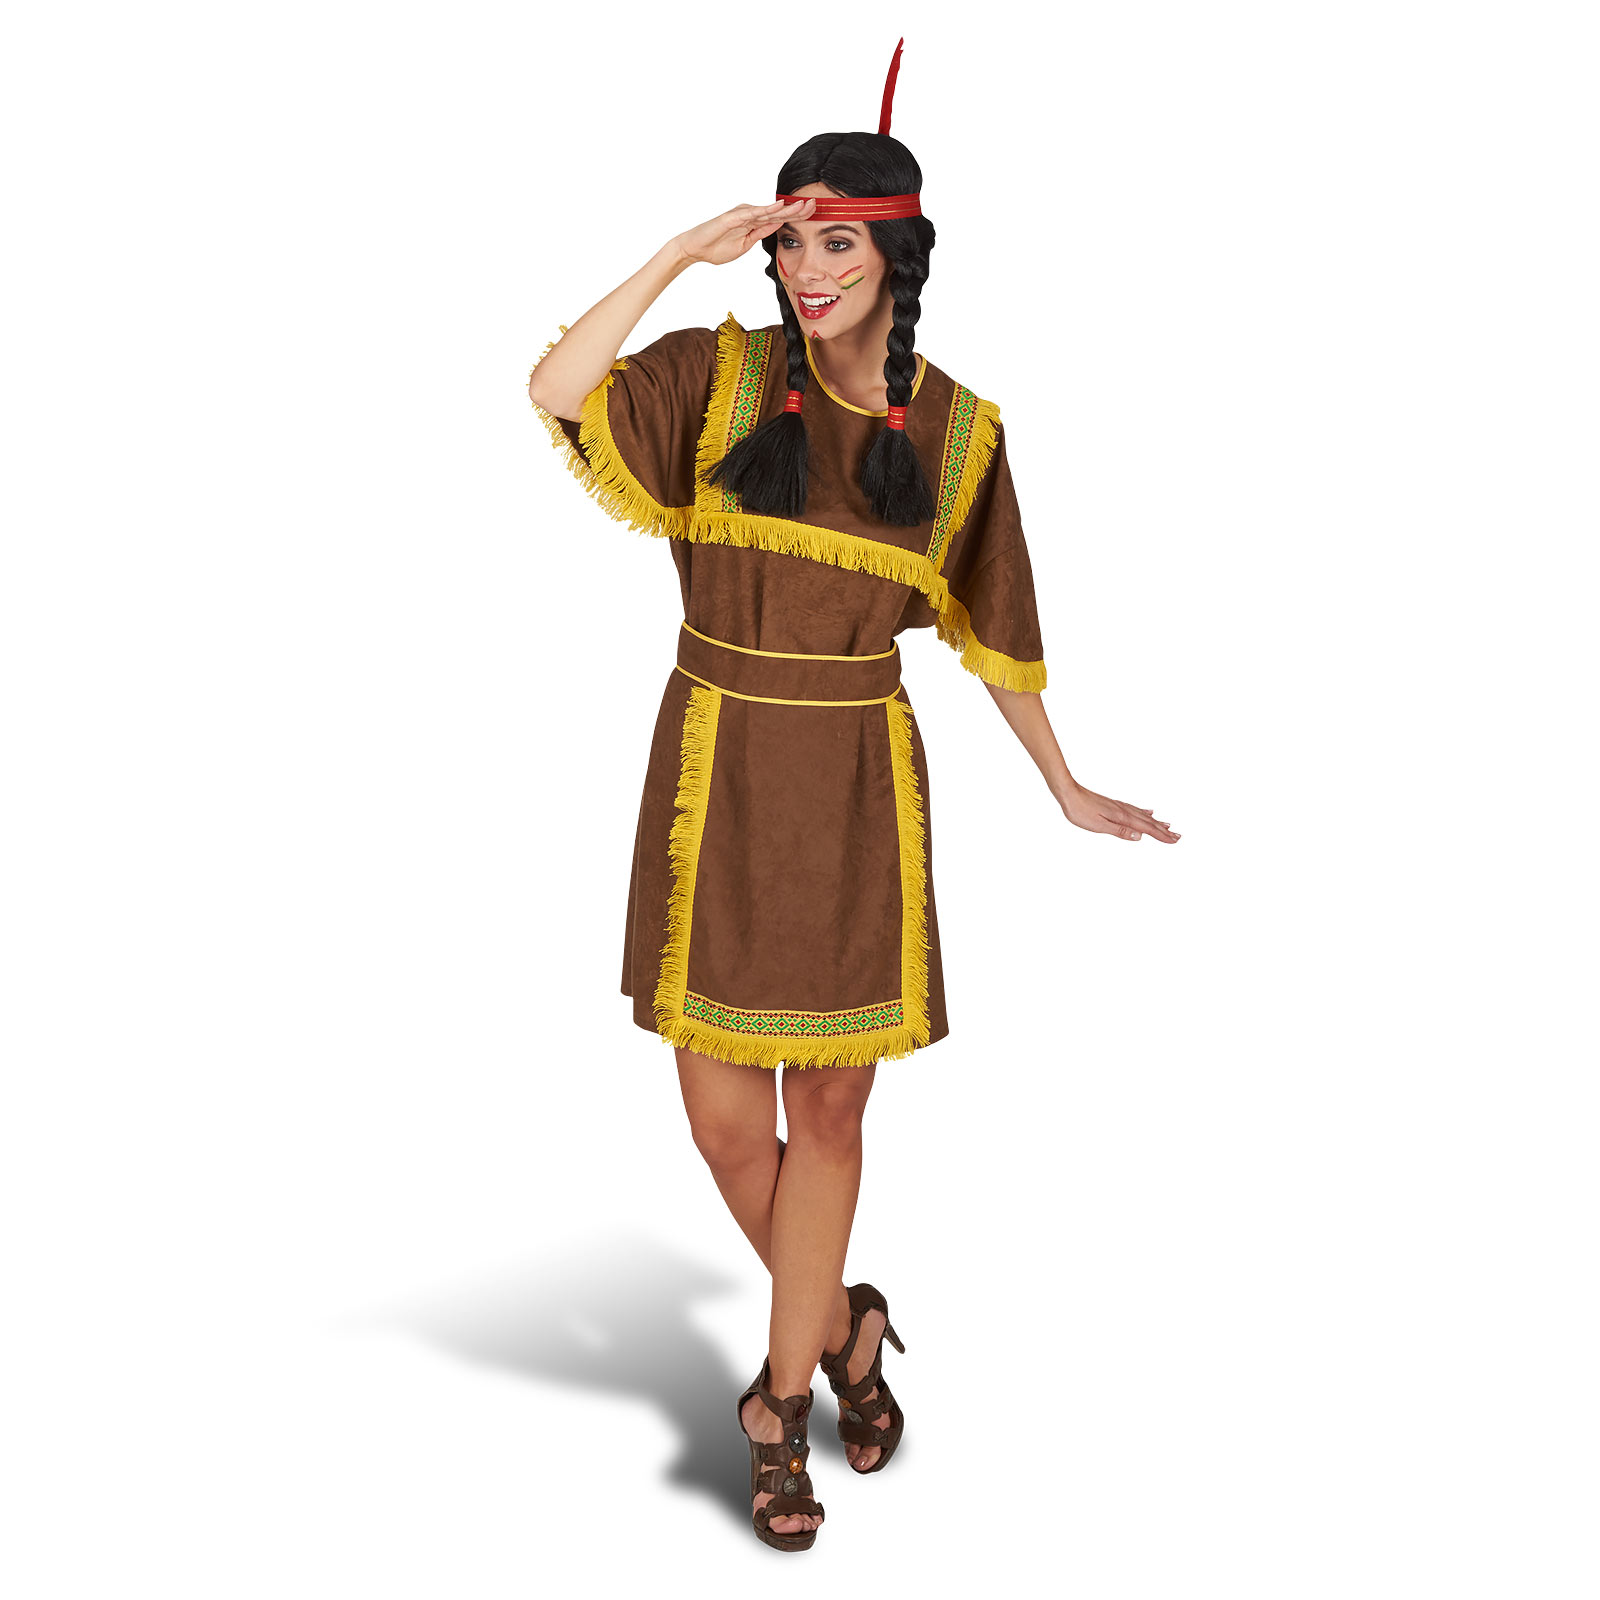 Sioux Indian Woman - Women's Costume